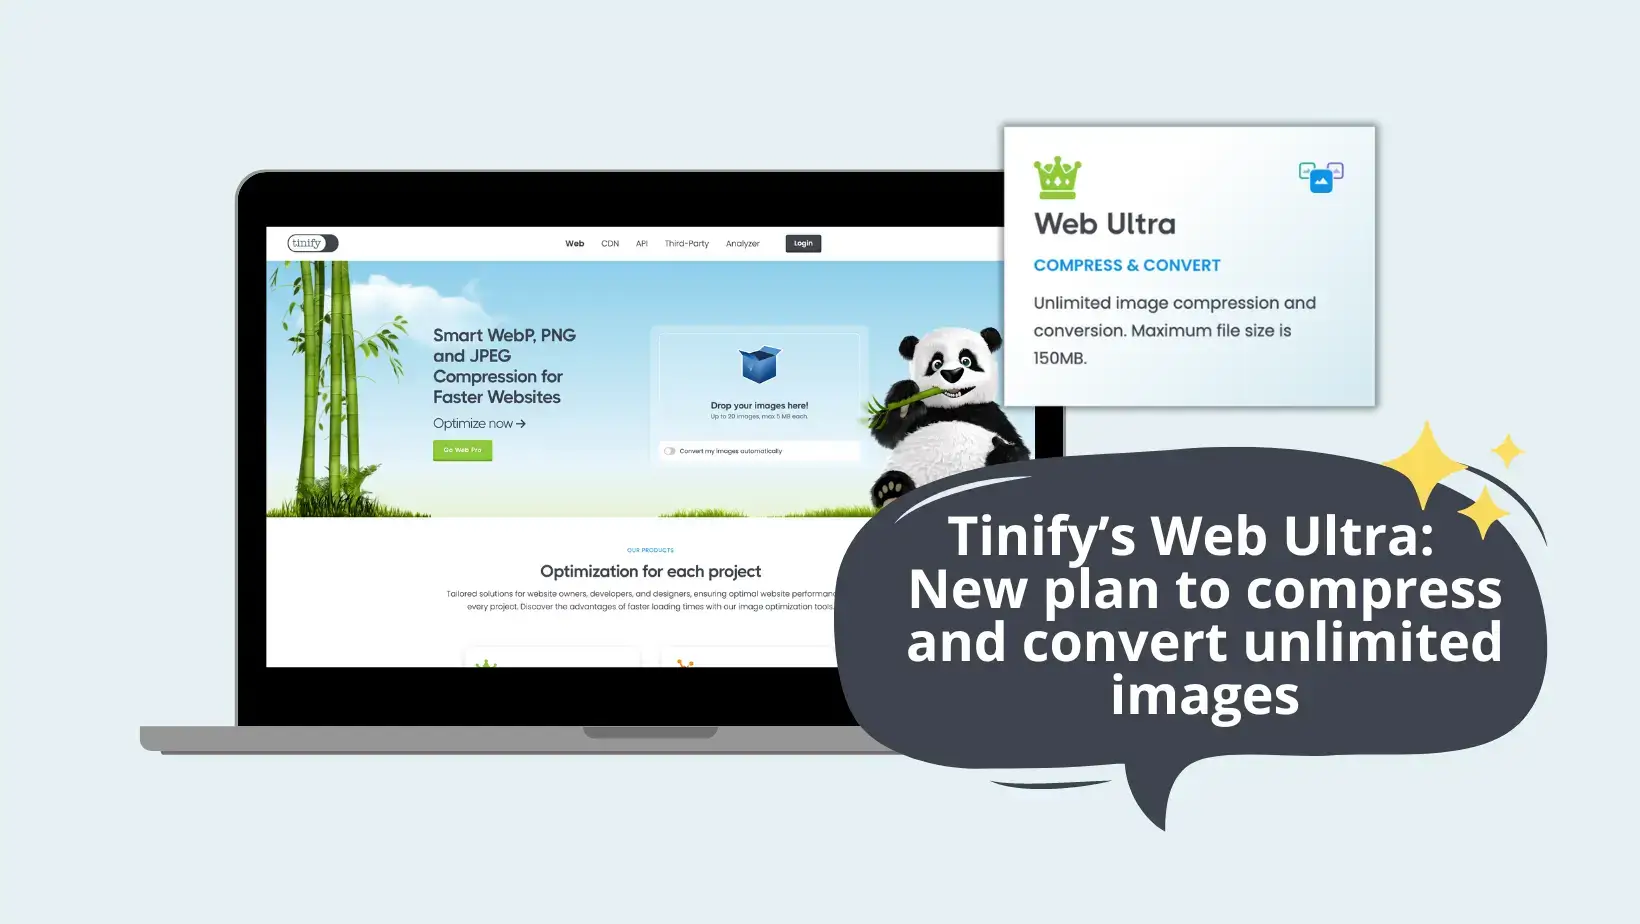 Tinify’s Web Ultra: A new plan to compress and convert unlimited images